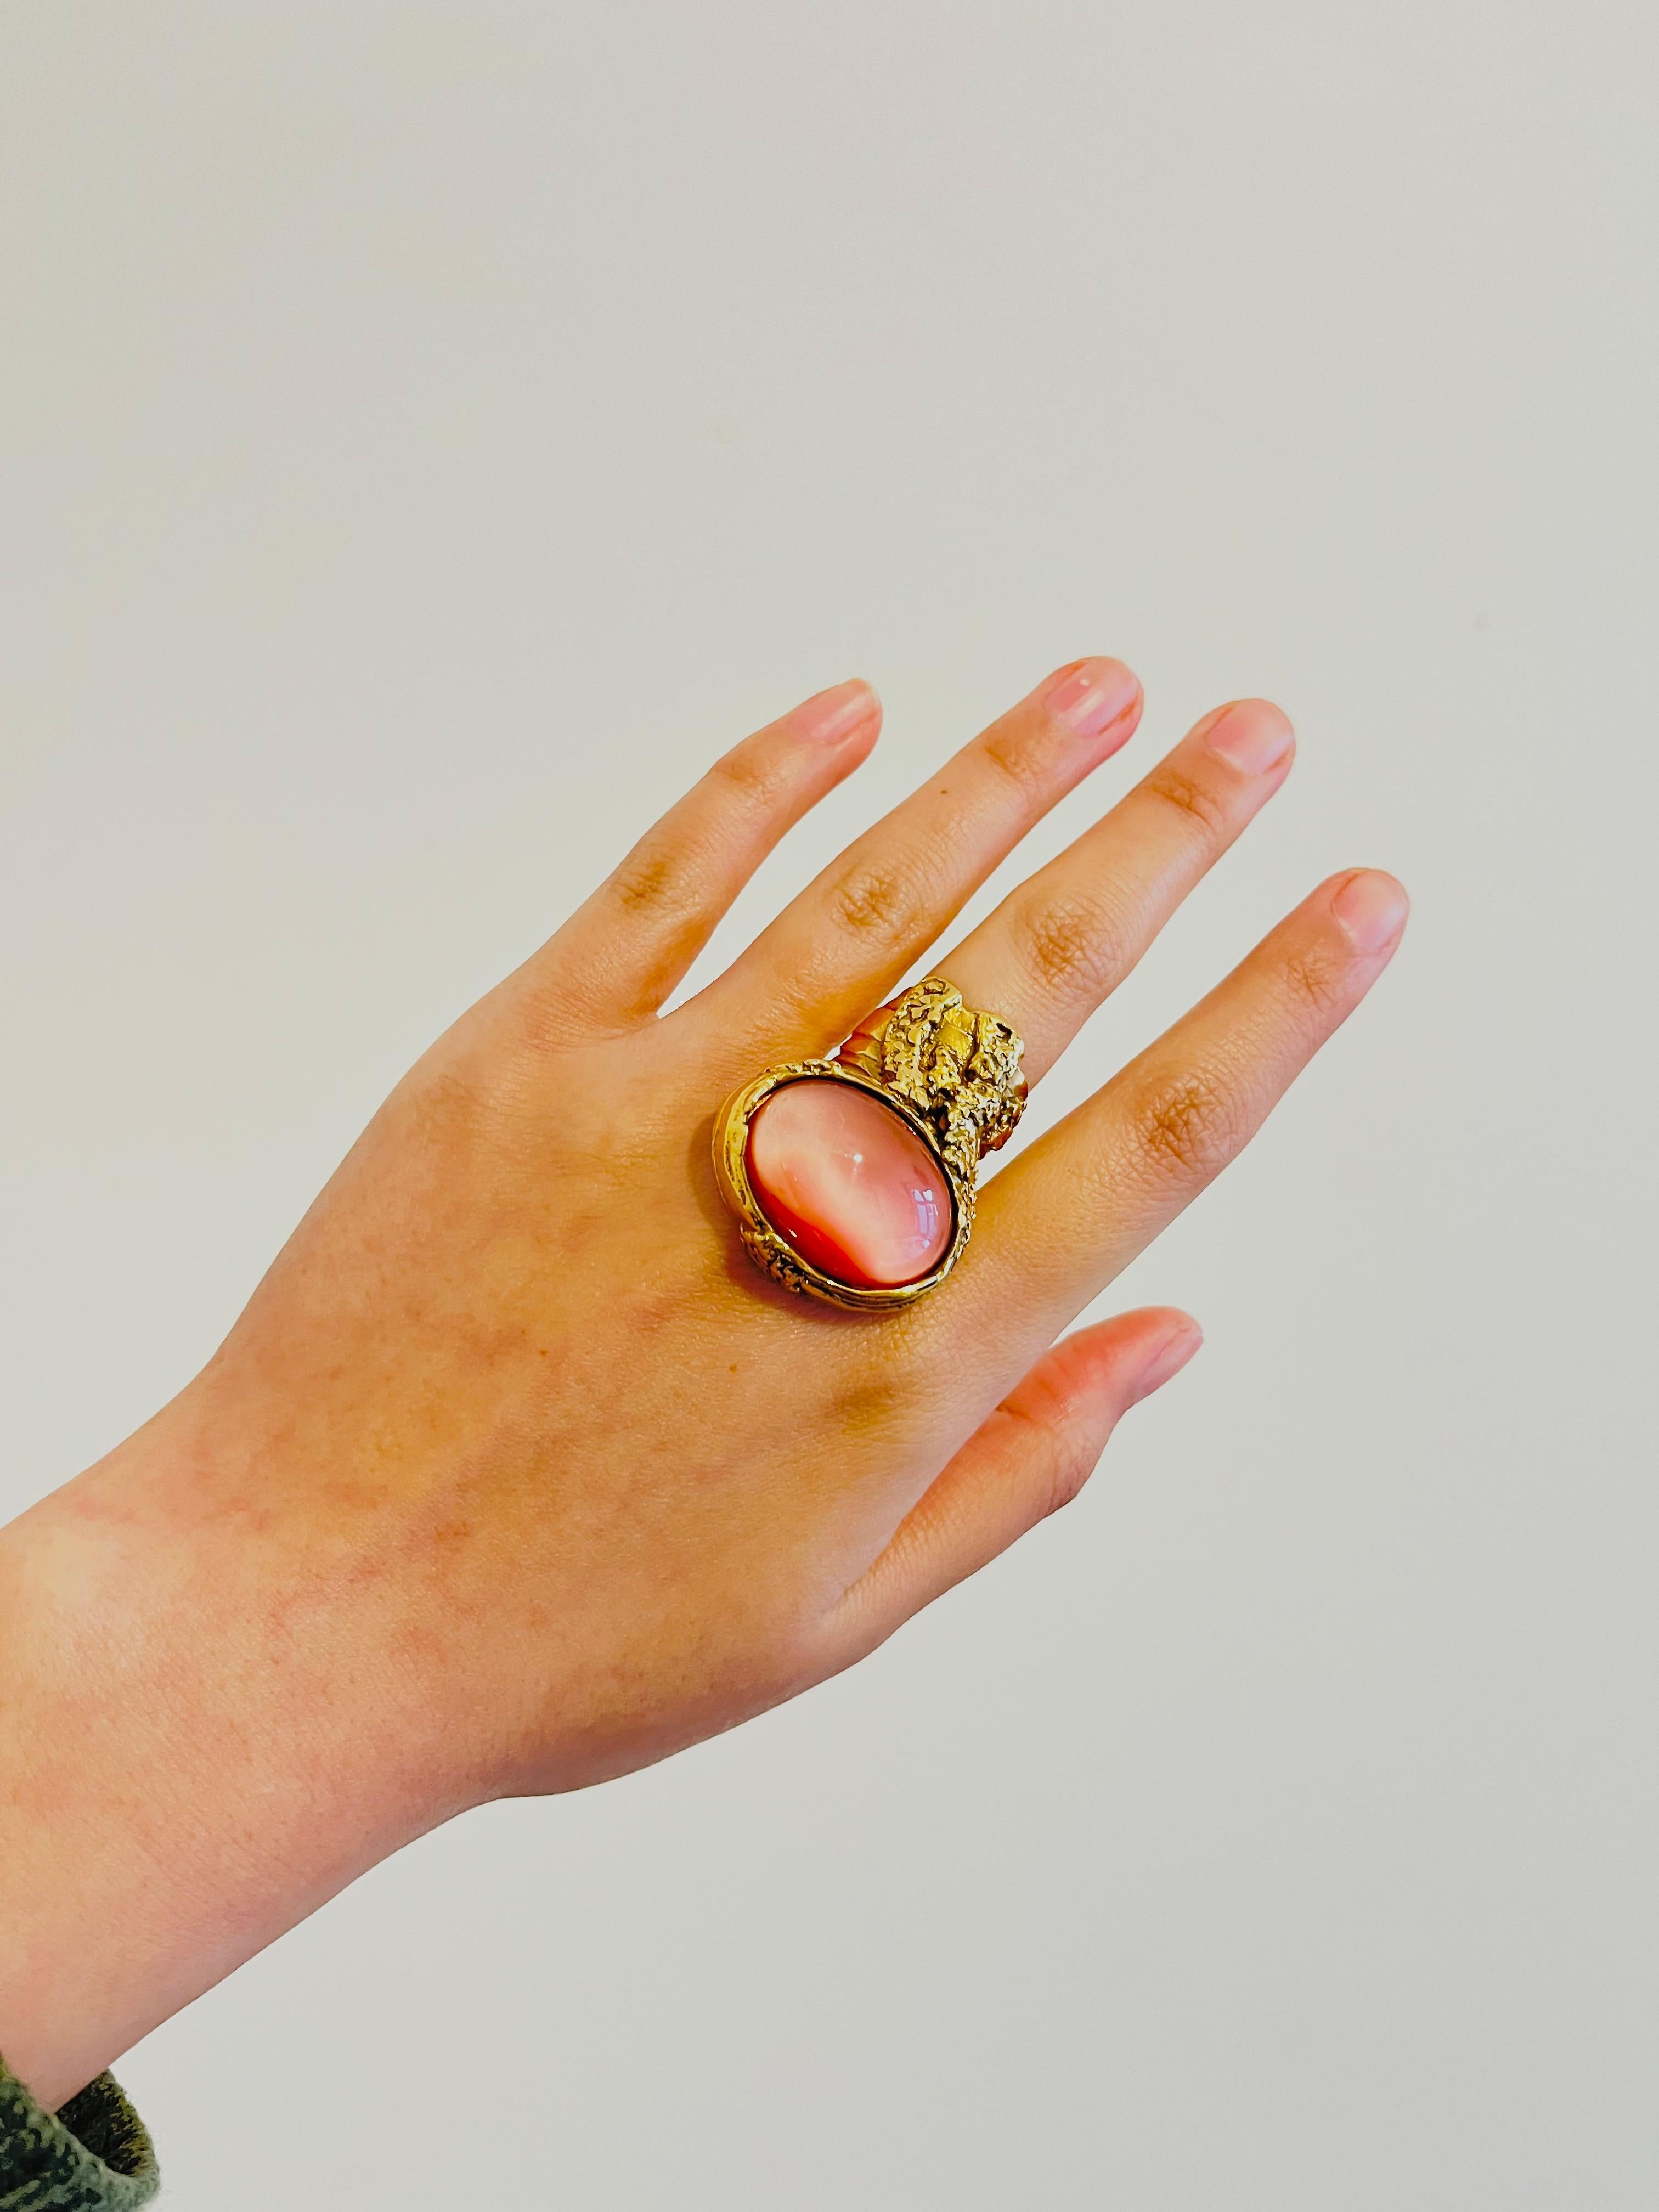 Yves Saint Laurent YSL Arty Clear Pink Statement Enamel Chunky Gold Ring, Size 6 In Excellent Condition For Sale In Wokingham, England